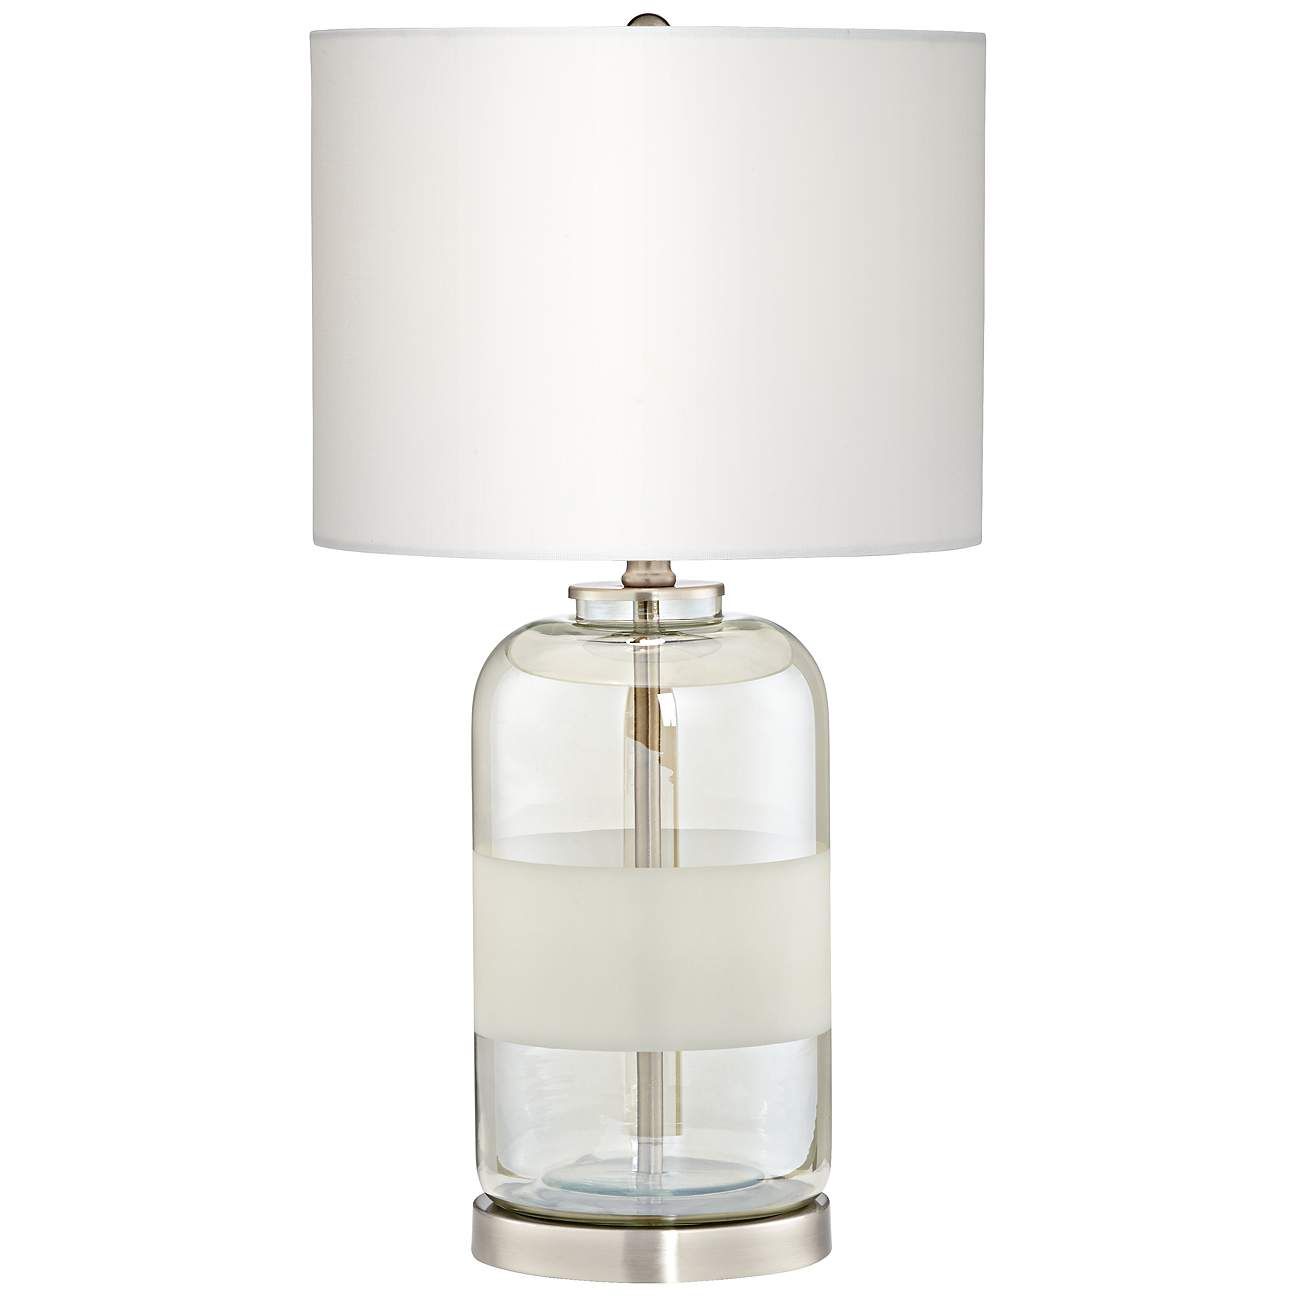 Kathy Ireland Moderne Textured Champagne Glass Table Lamp | Lamps Plus